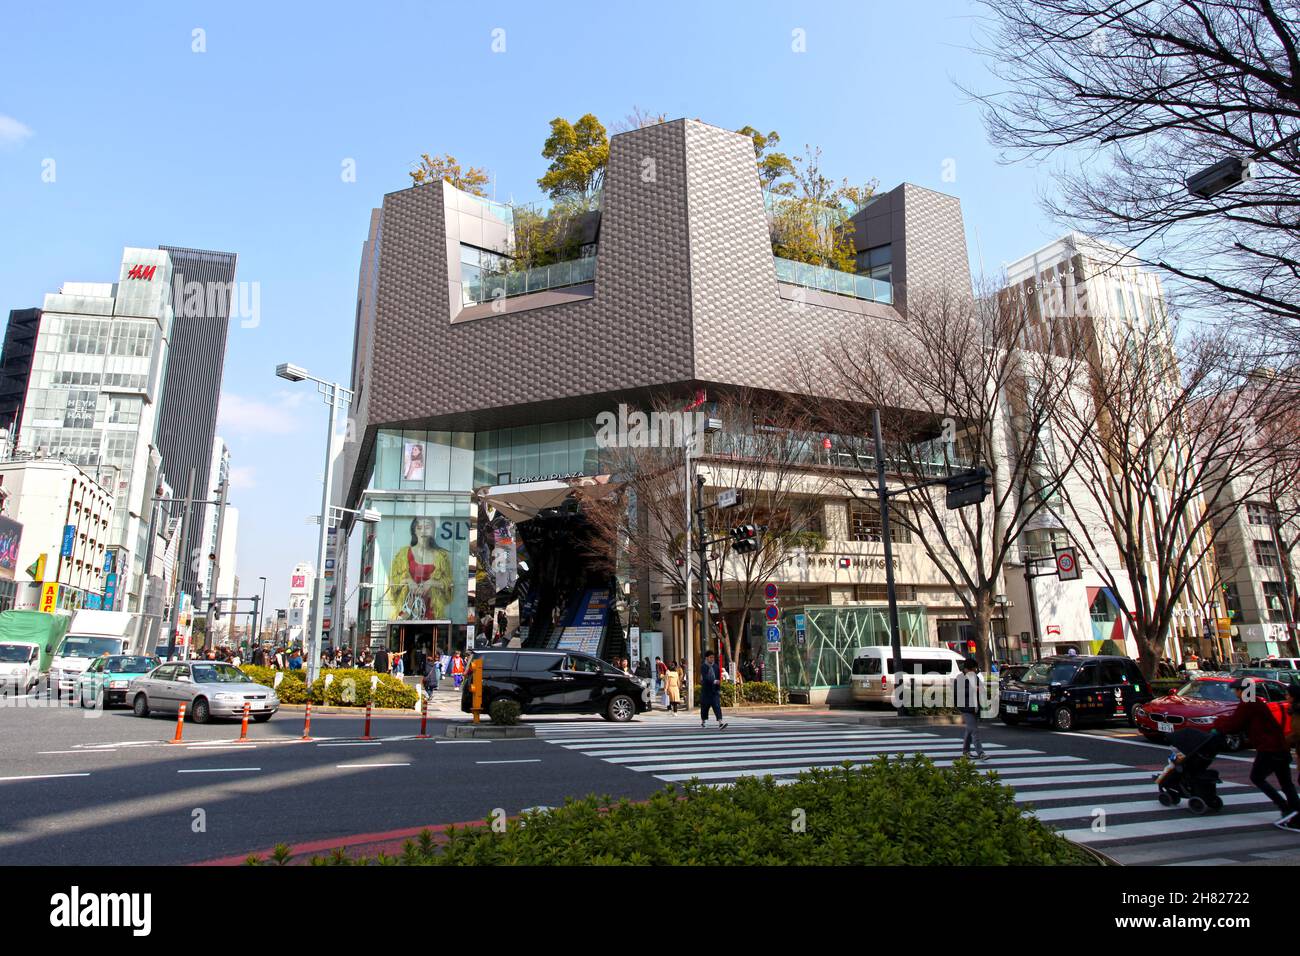 The Tokyu Plaza Omotesando in Harajuku in Tokyo, Japan. The building is a trendy fashion shopping mall famous for it's mirrored entrance. Stock Photo